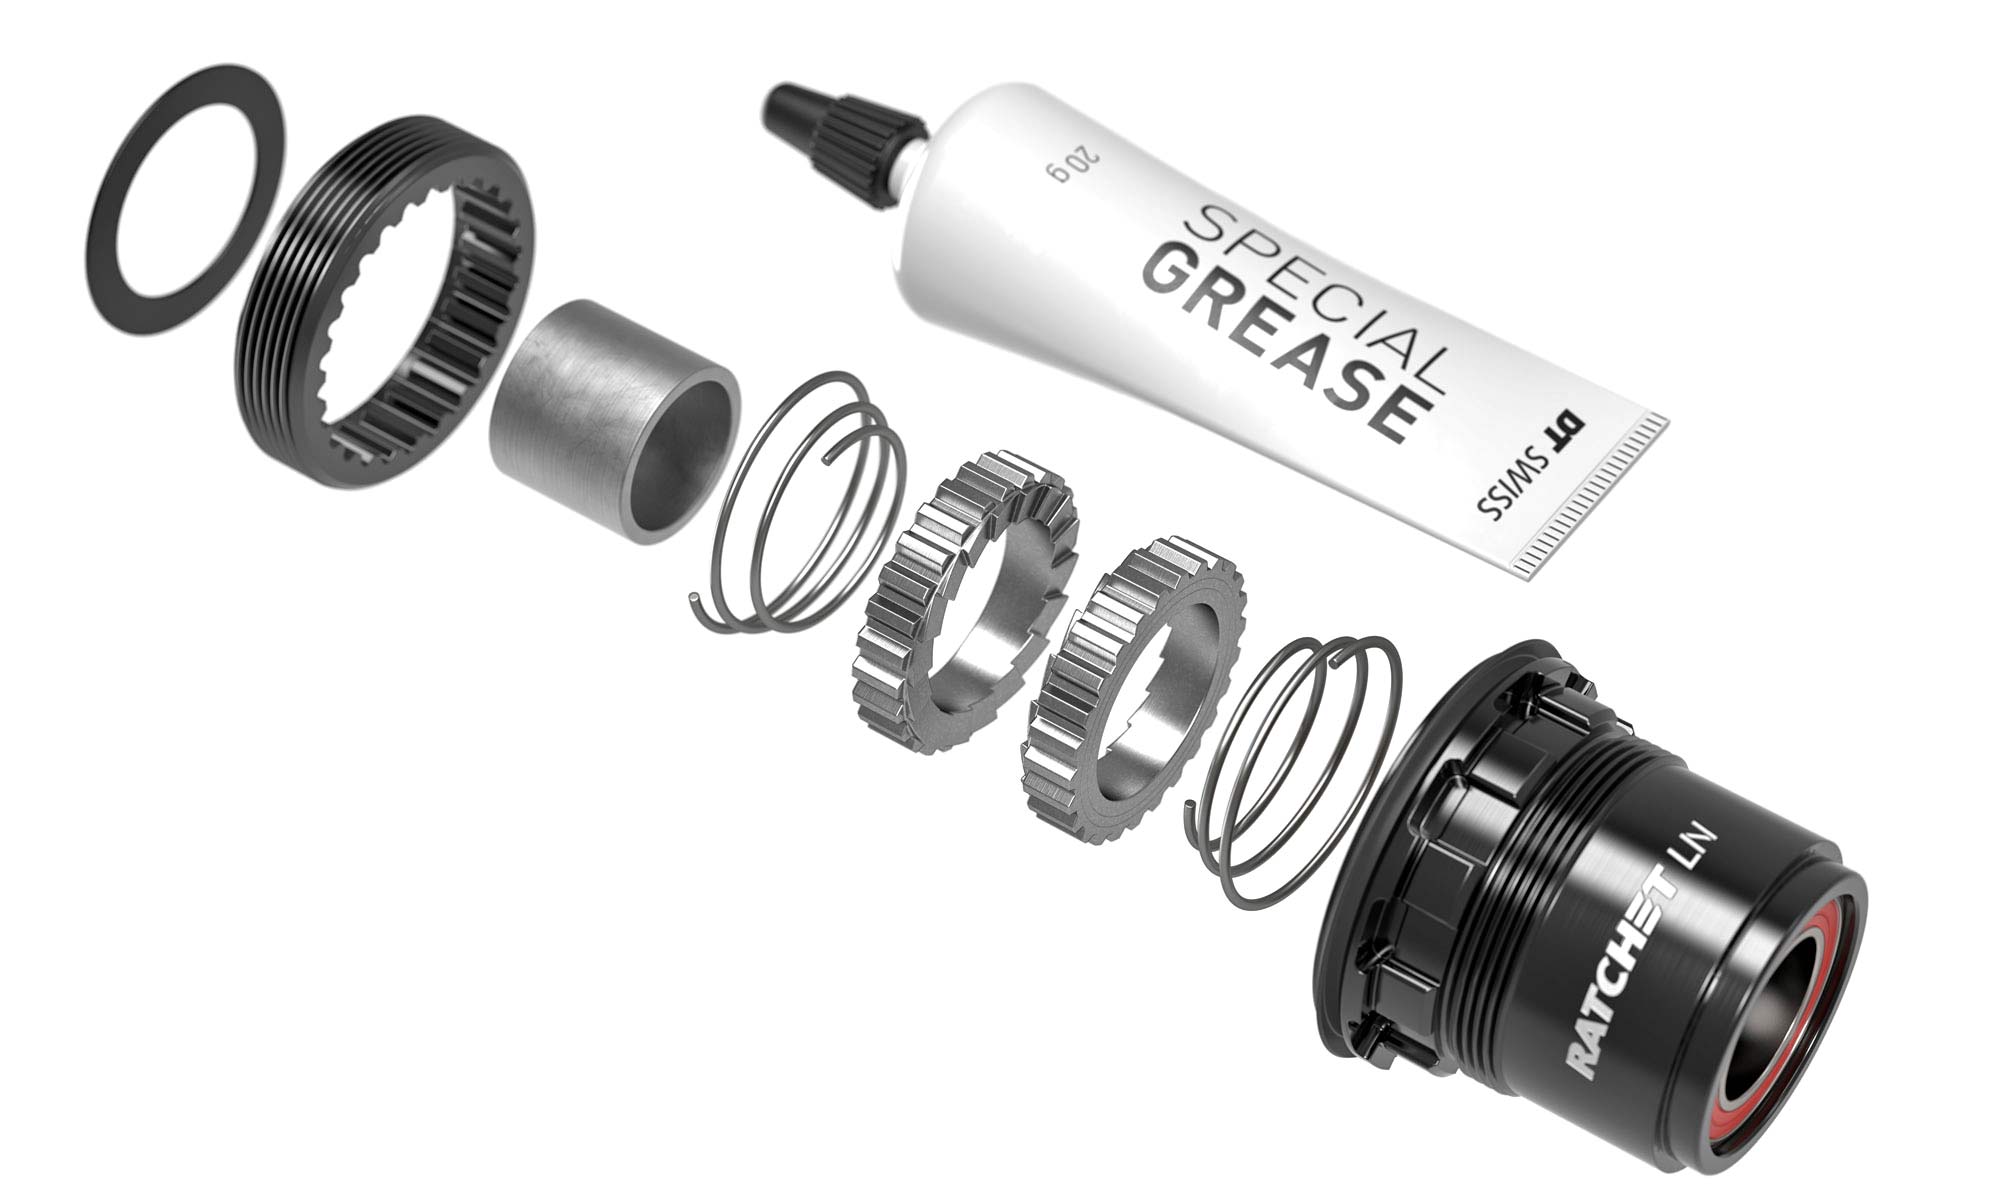 DT Swiss Ratchet LN hub upgrade kit, from 3-pawls to Star Ratchet, kit contents